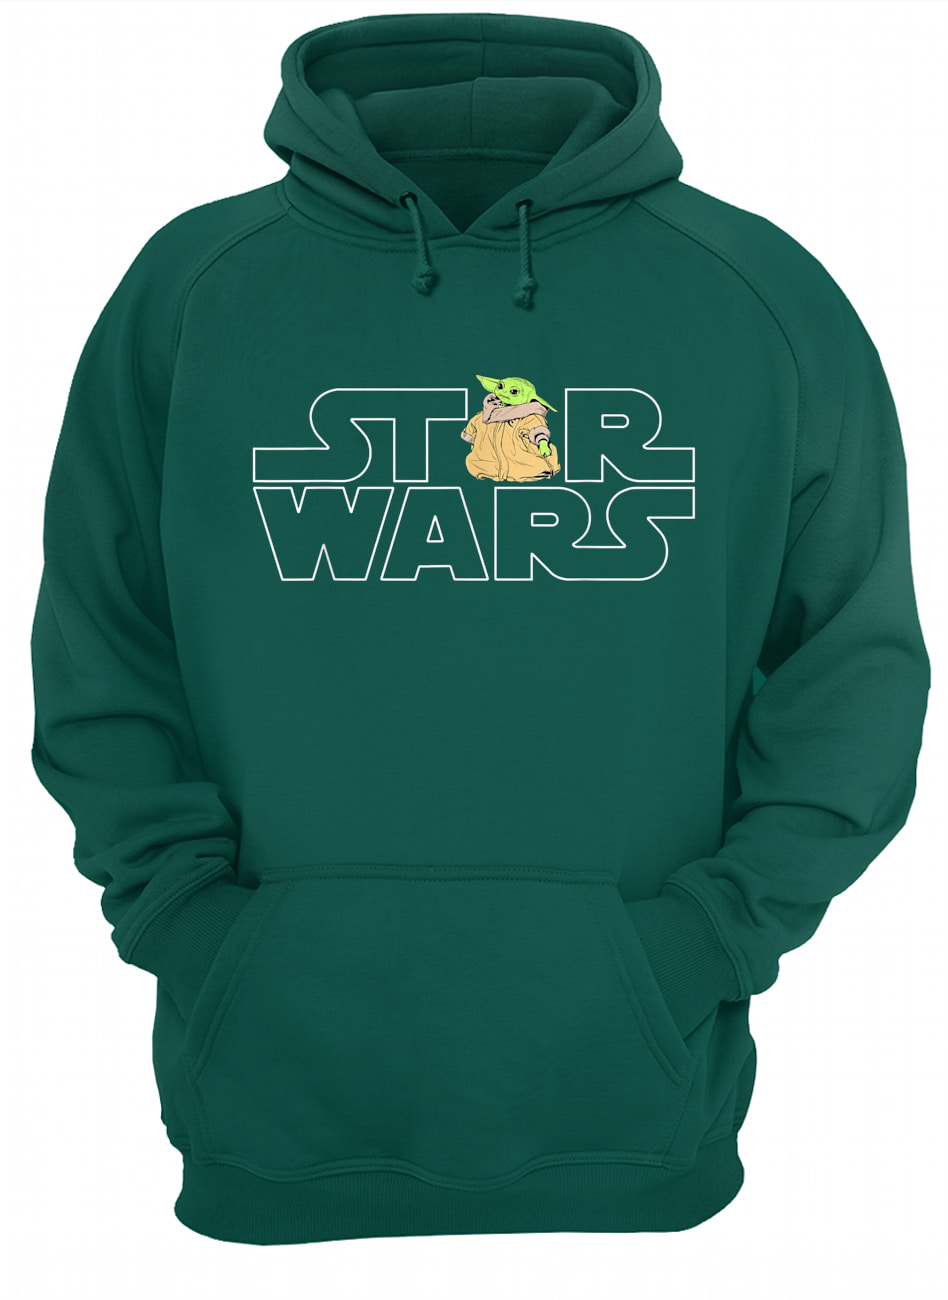 Star wars logo and the child from the mandalorian hoodie